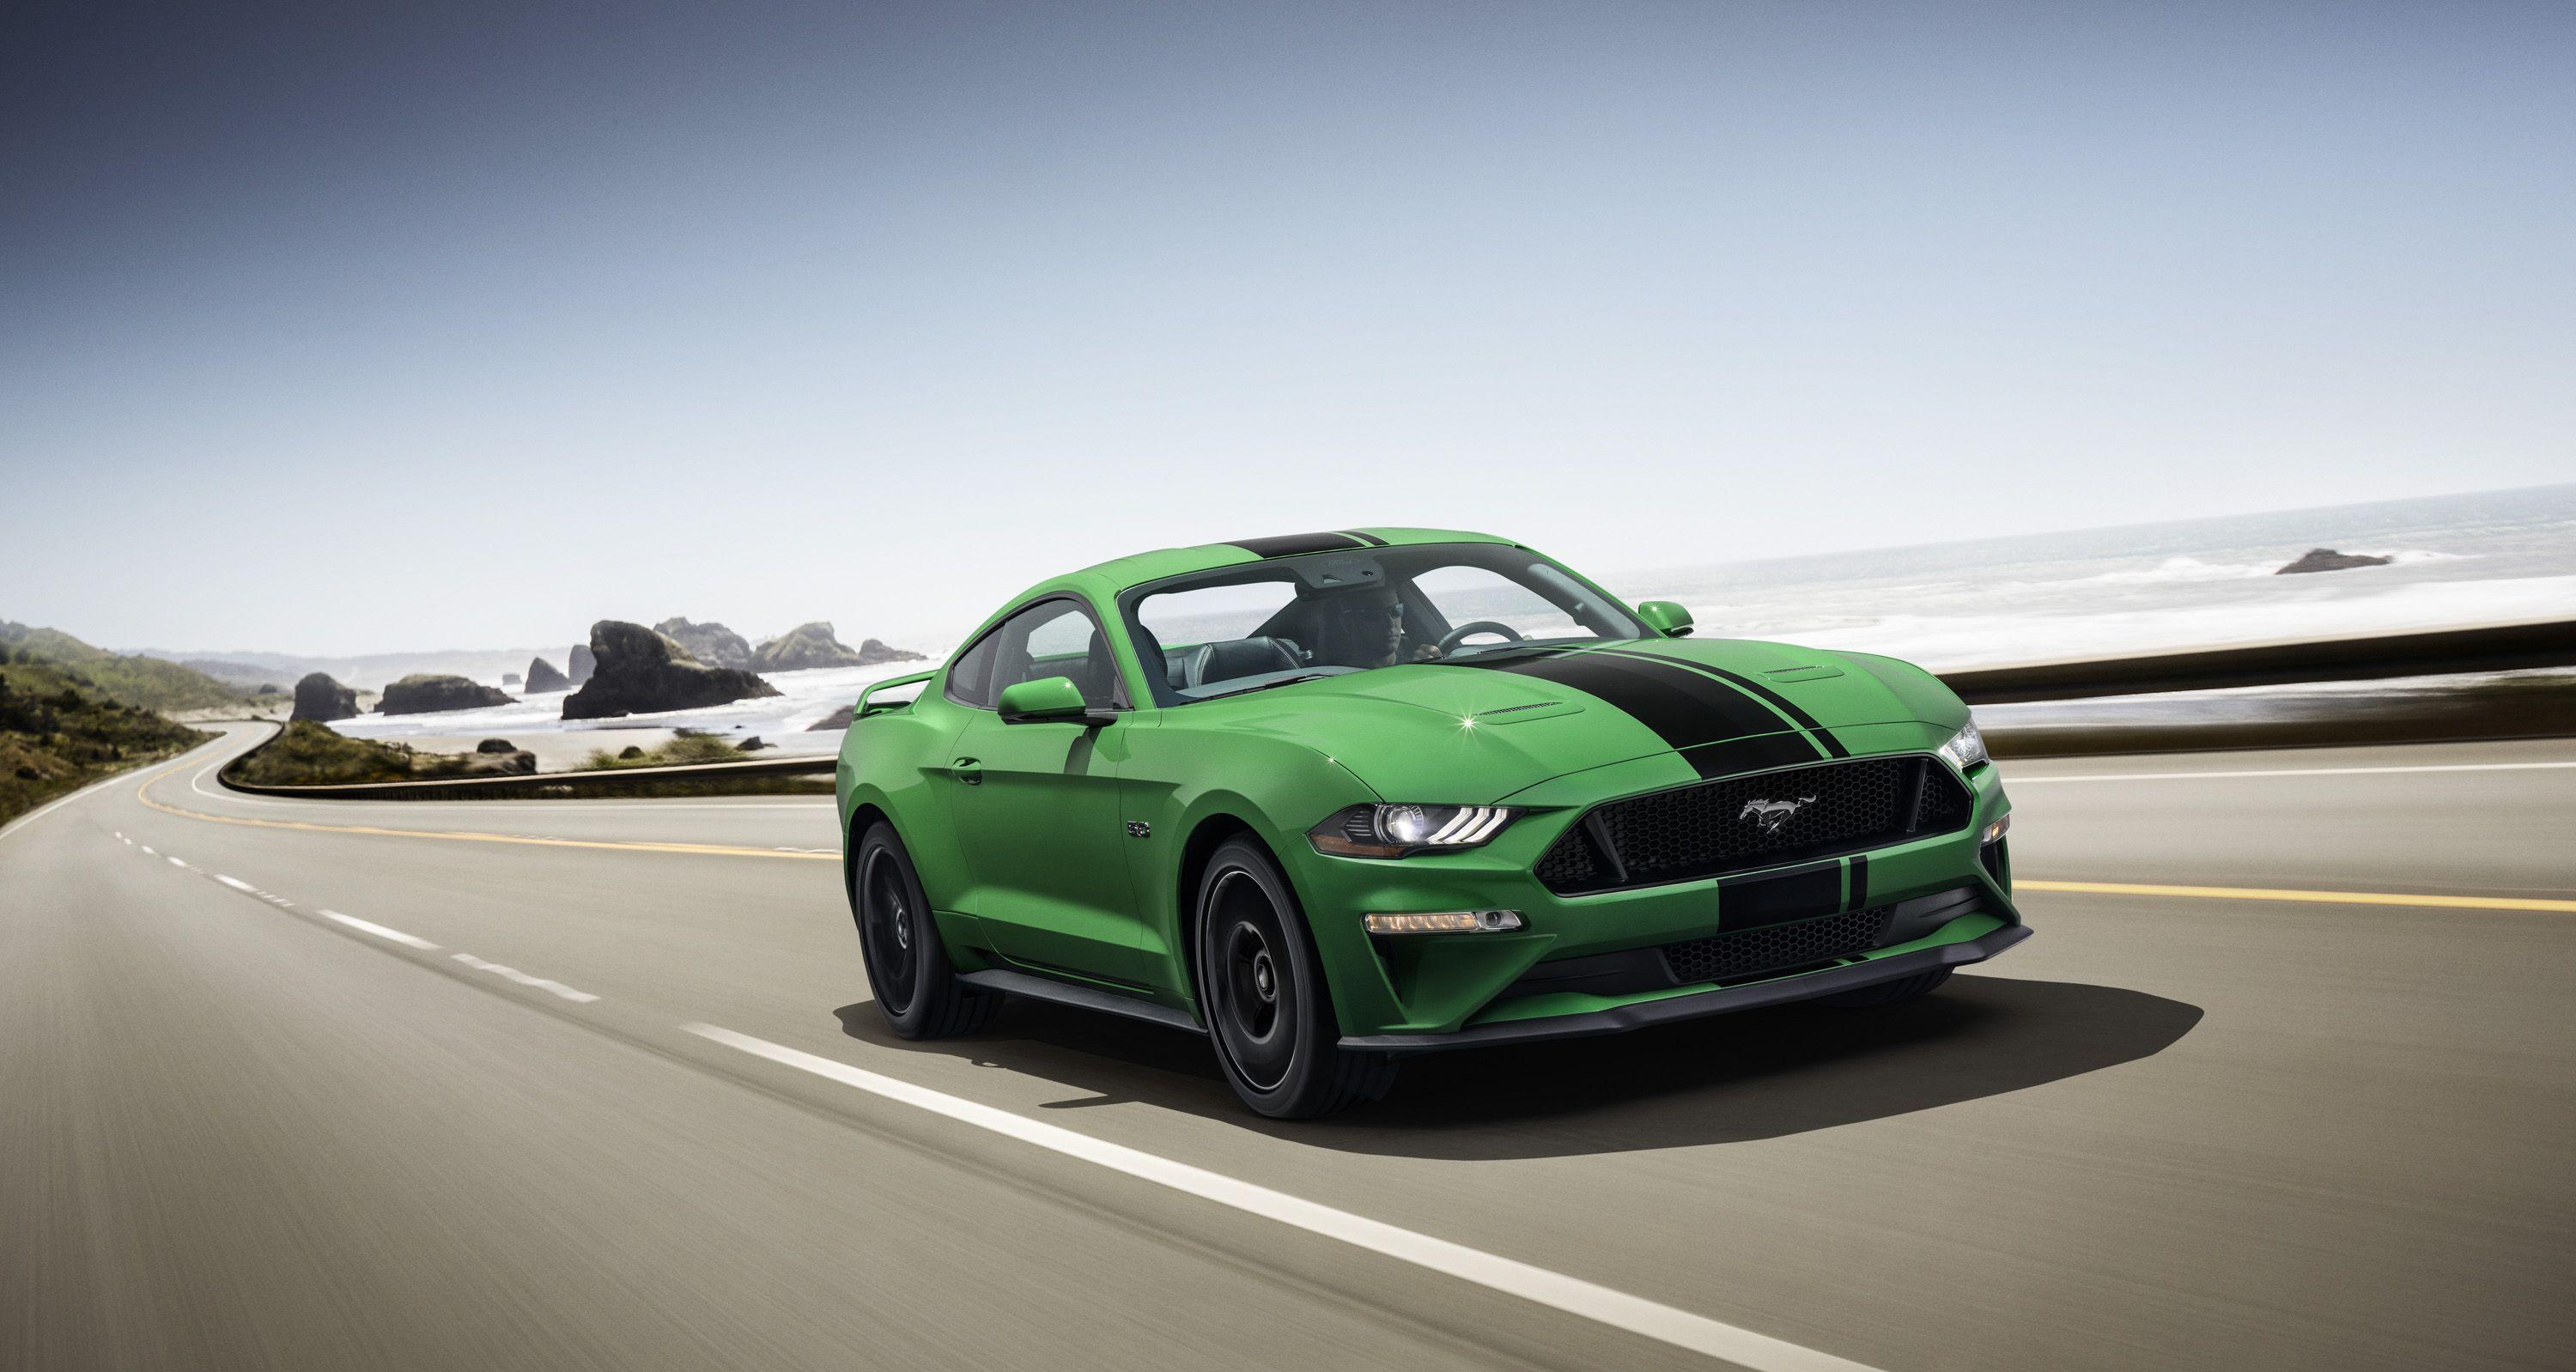 Ford Mustang Paint Logo - Ford Launches Need For Green Paint For 2019 Mustang | Top Speed